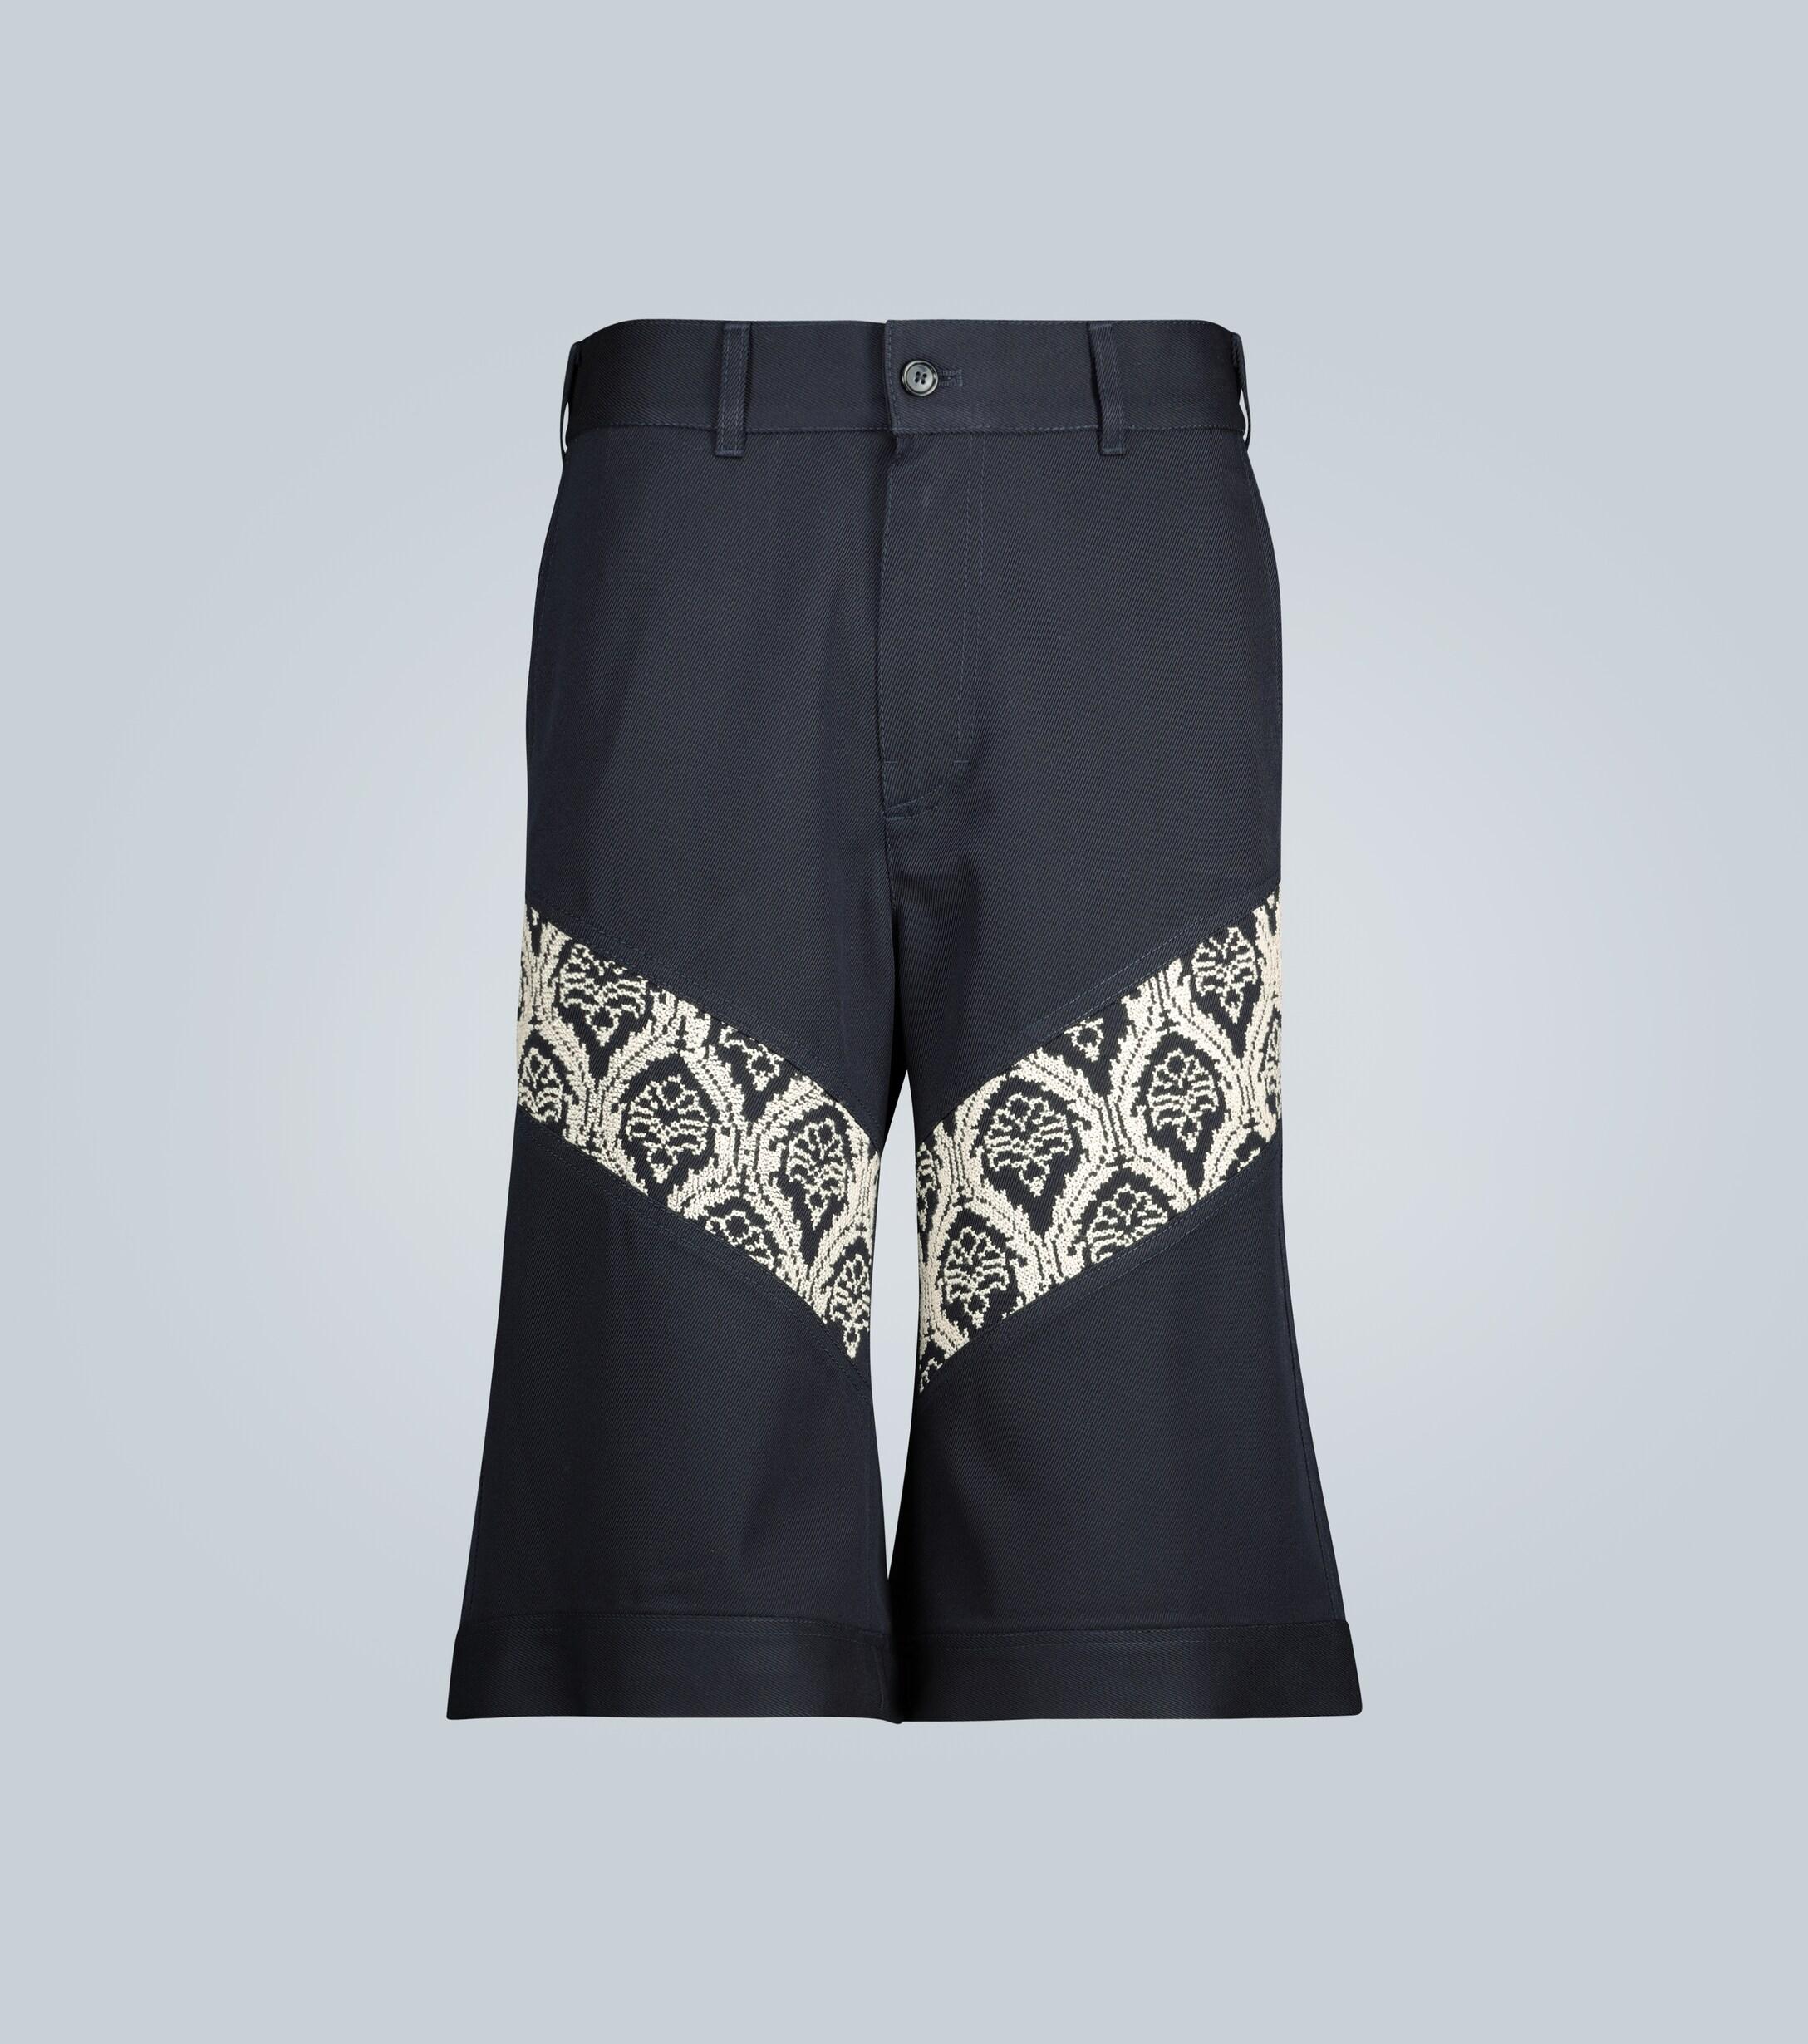 Adish Wool Embroidered Knee-length Shorts in Blue for Men - Lyst